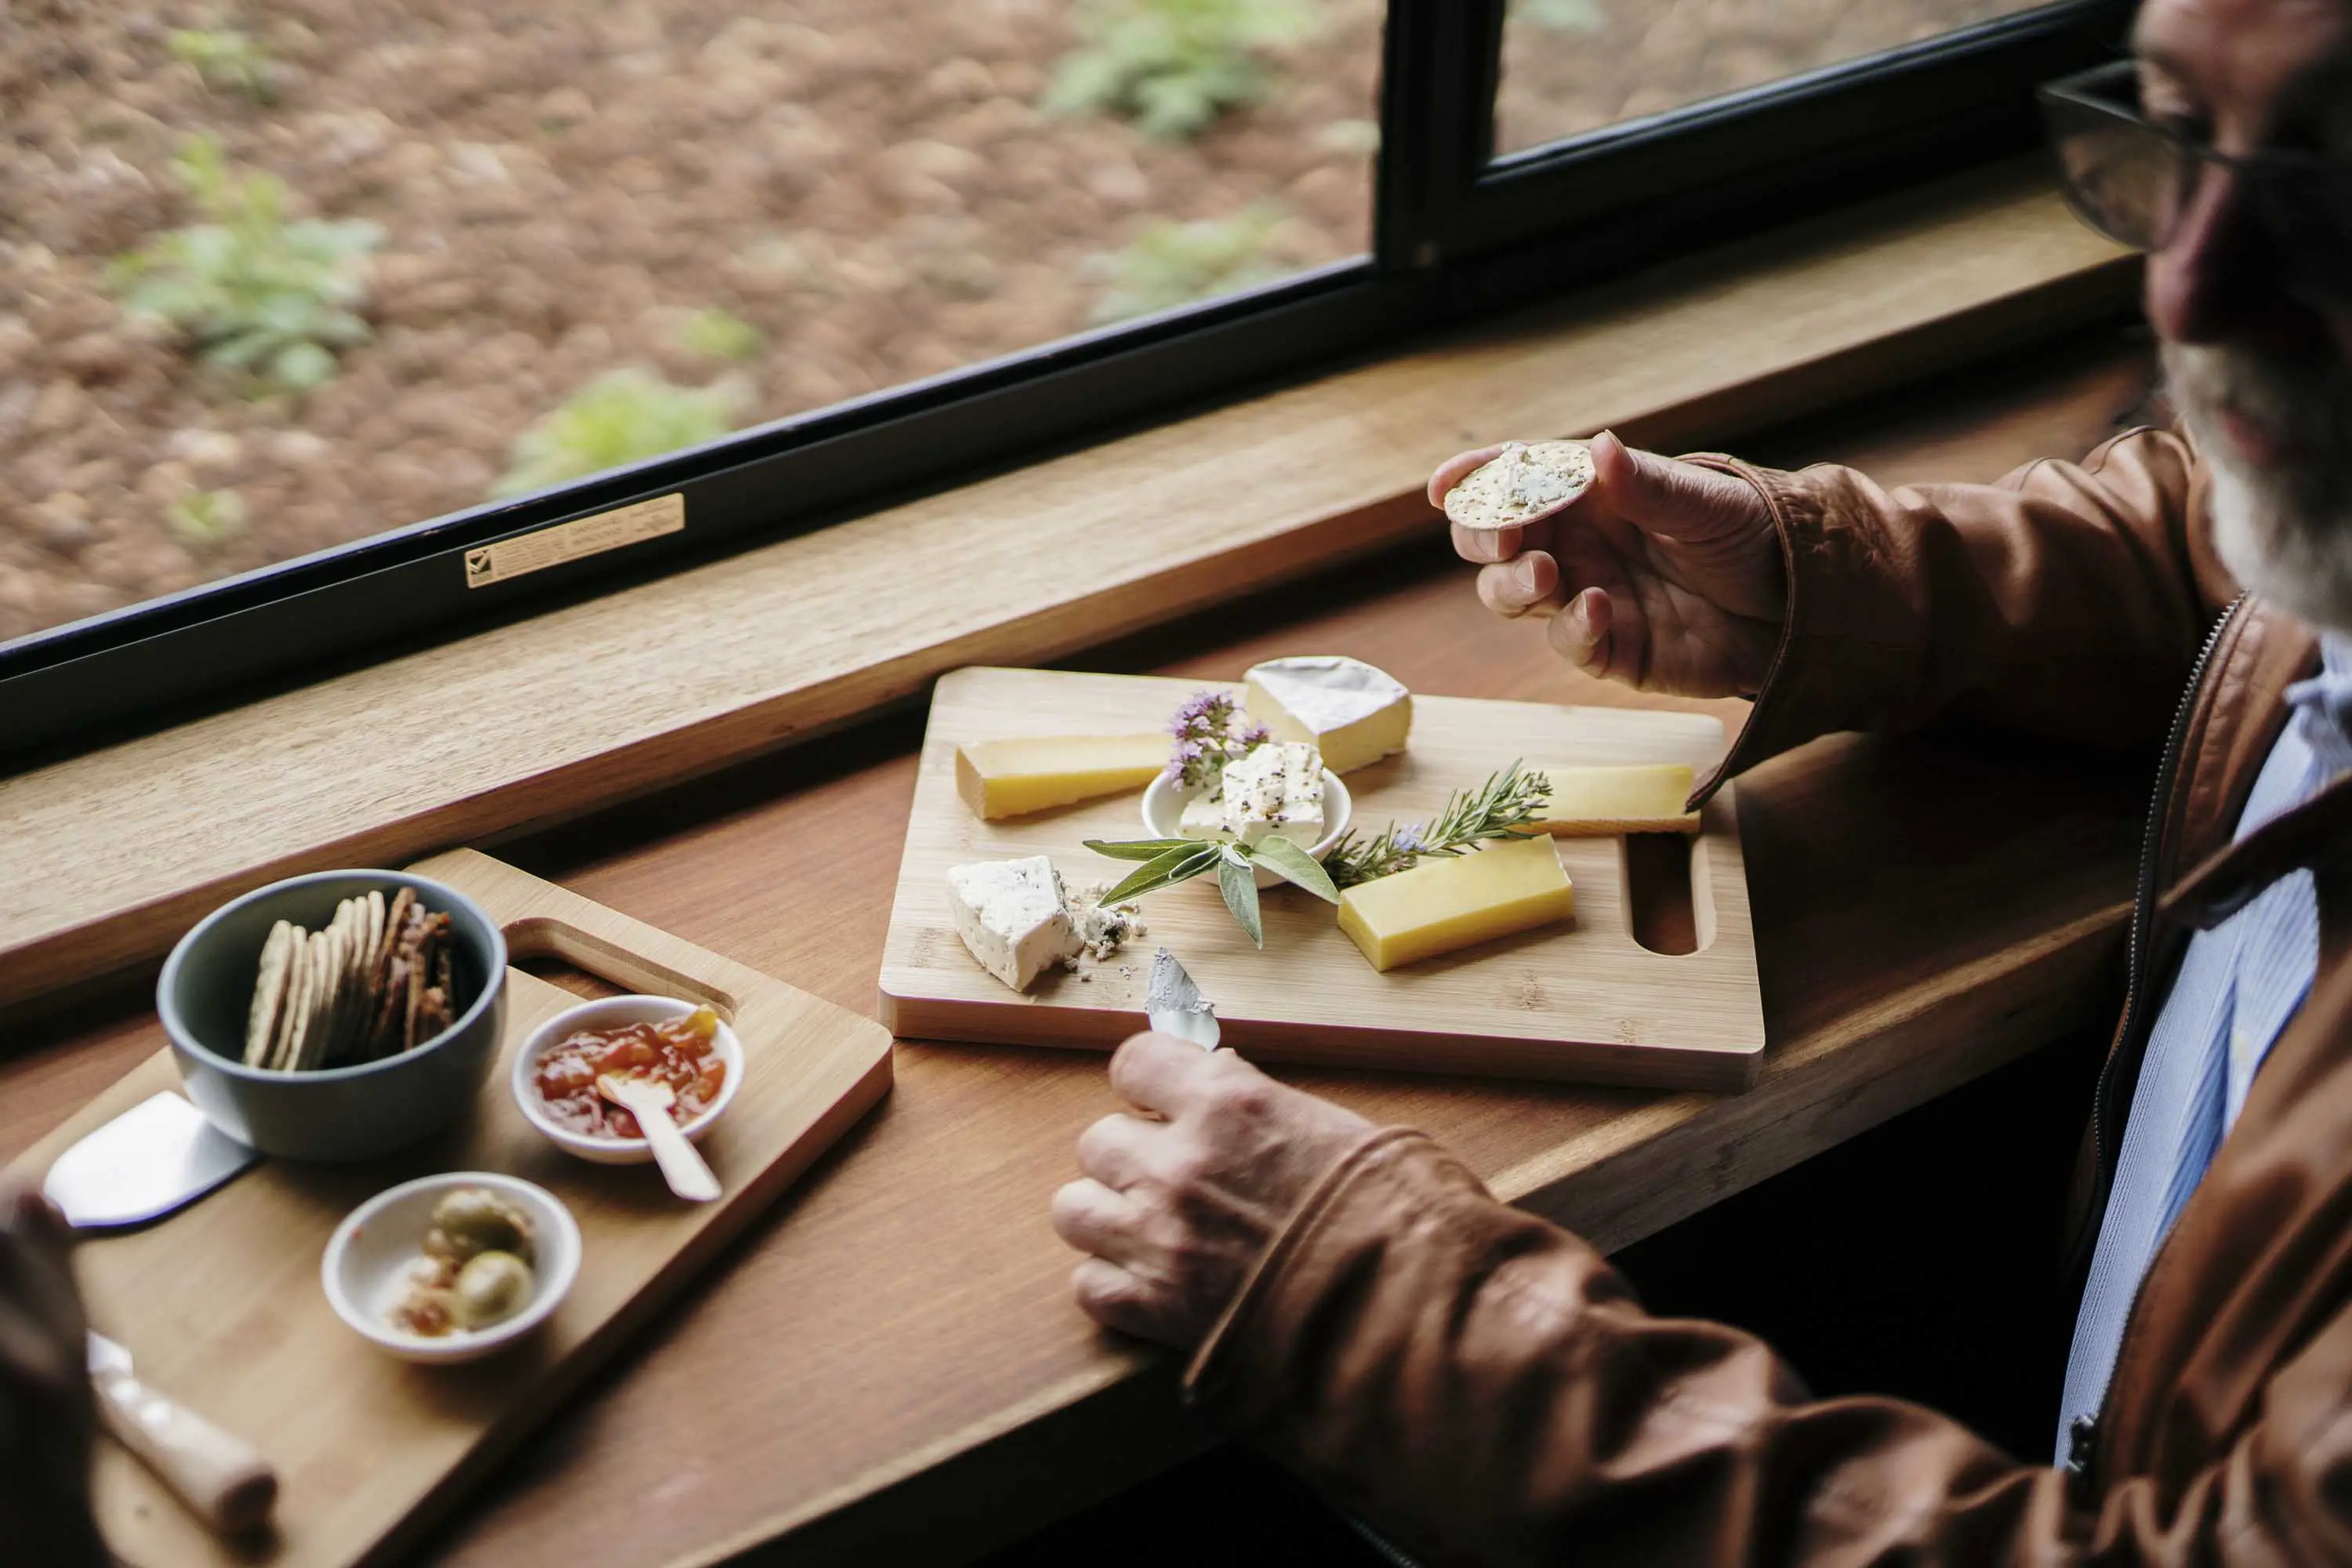 A man sits at a bench eating a cheese platter with jams, olives and crackers.  